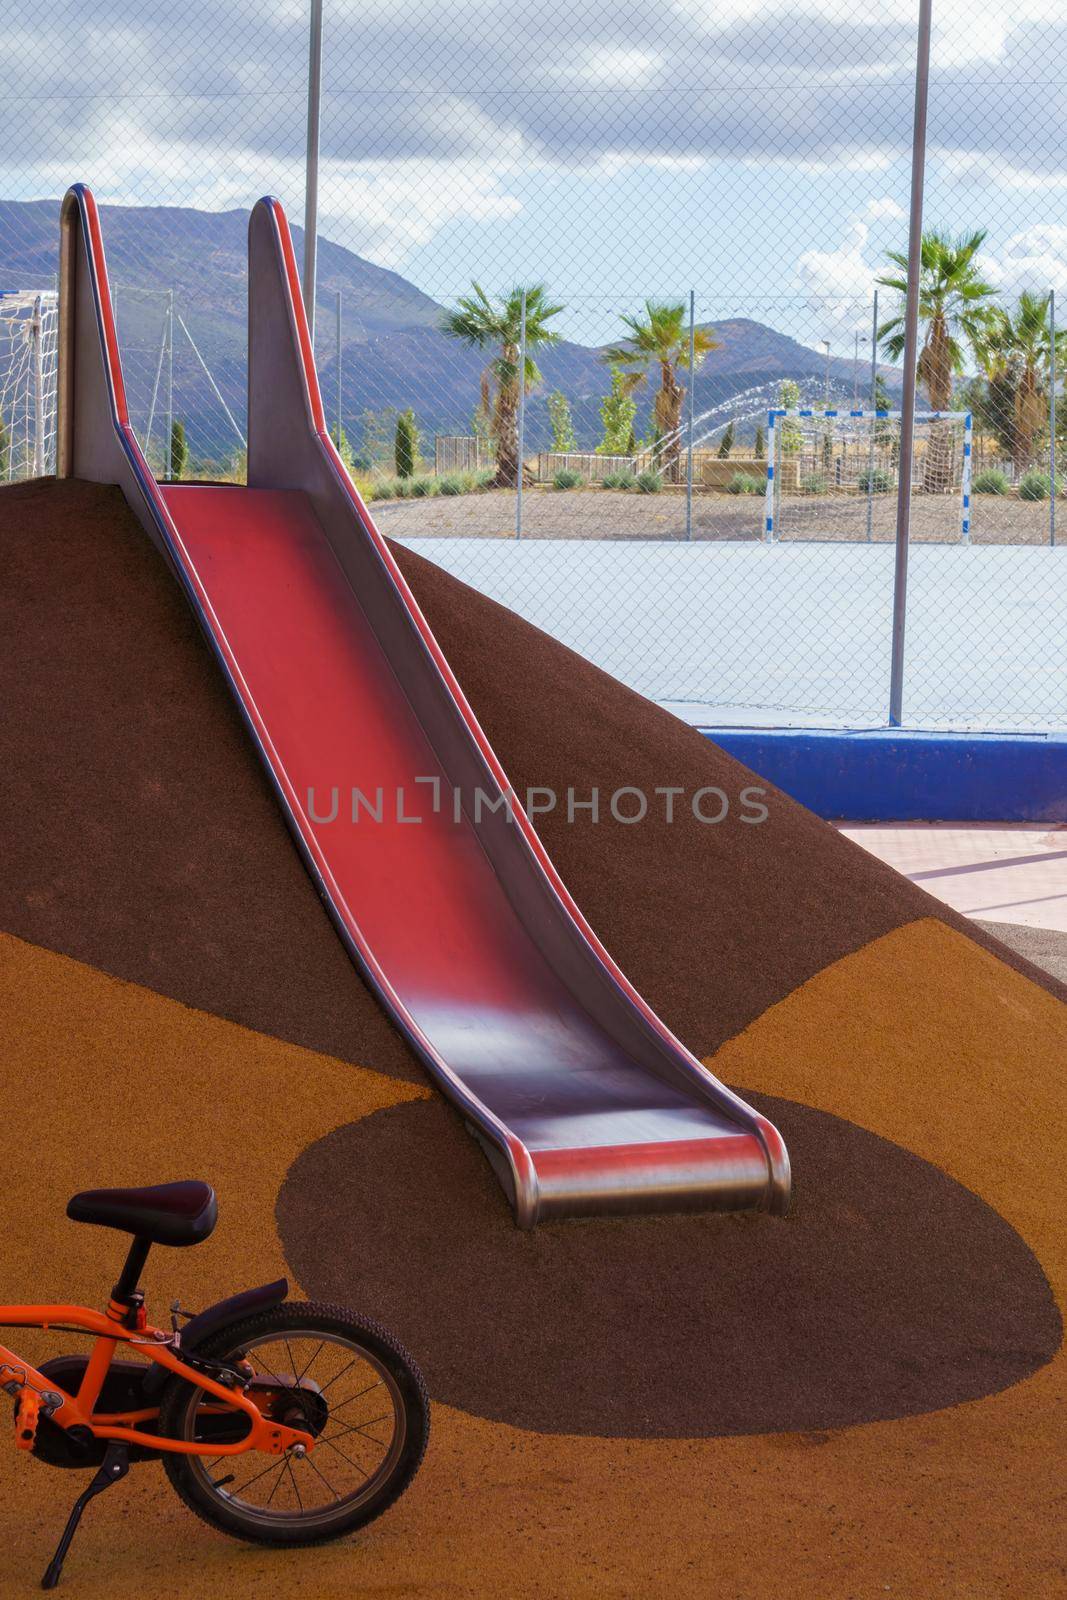 slide and bicycle in a playground, playground equipment for children